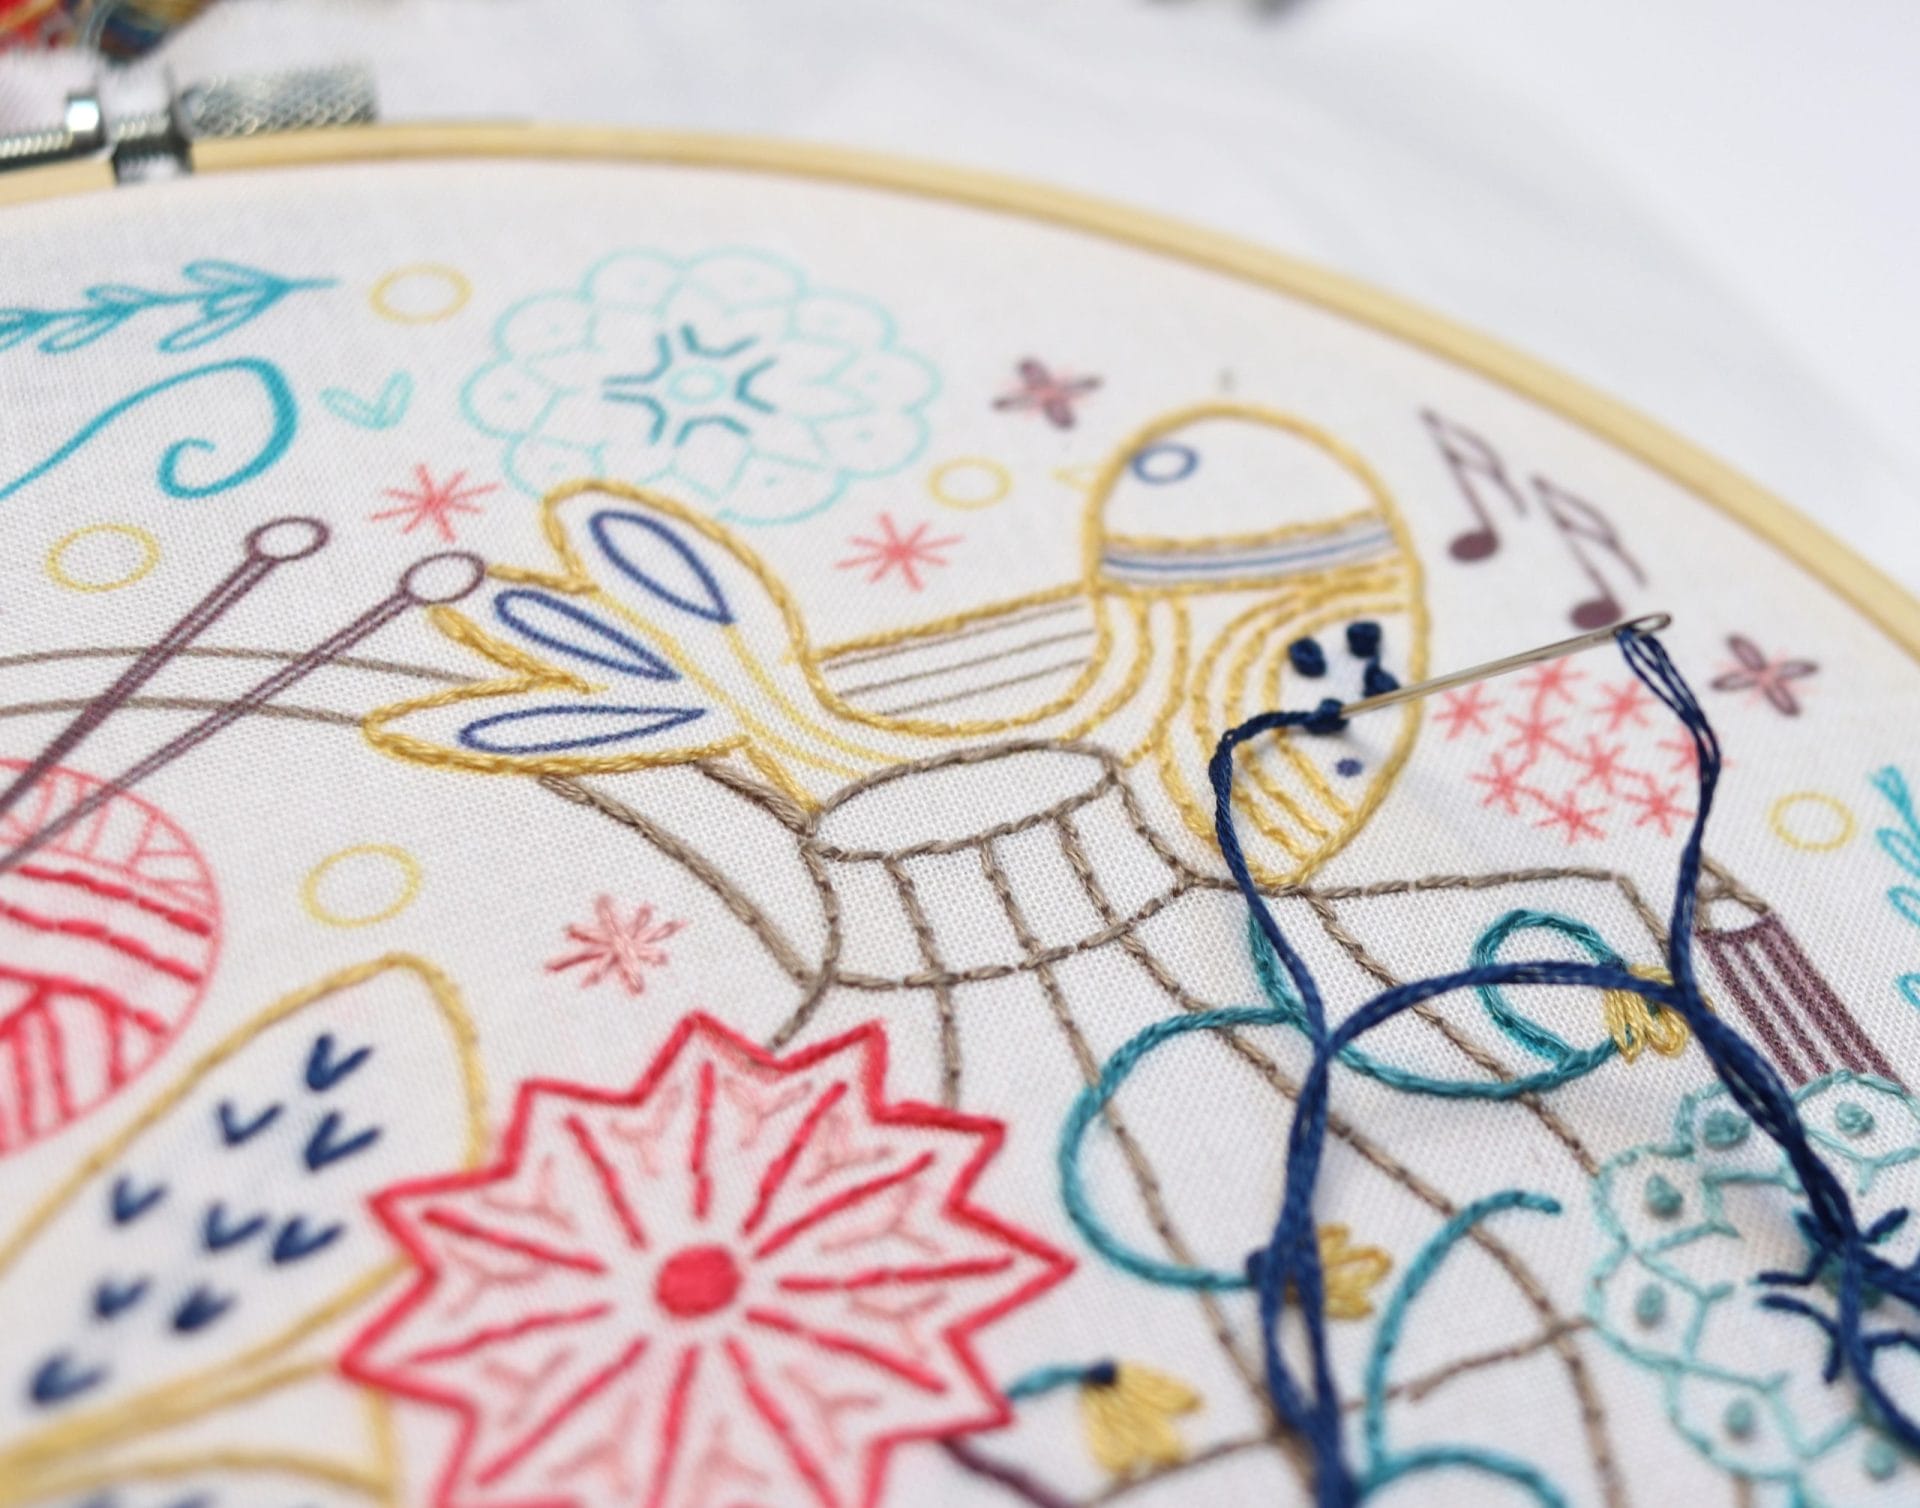 create embroidery project in progress